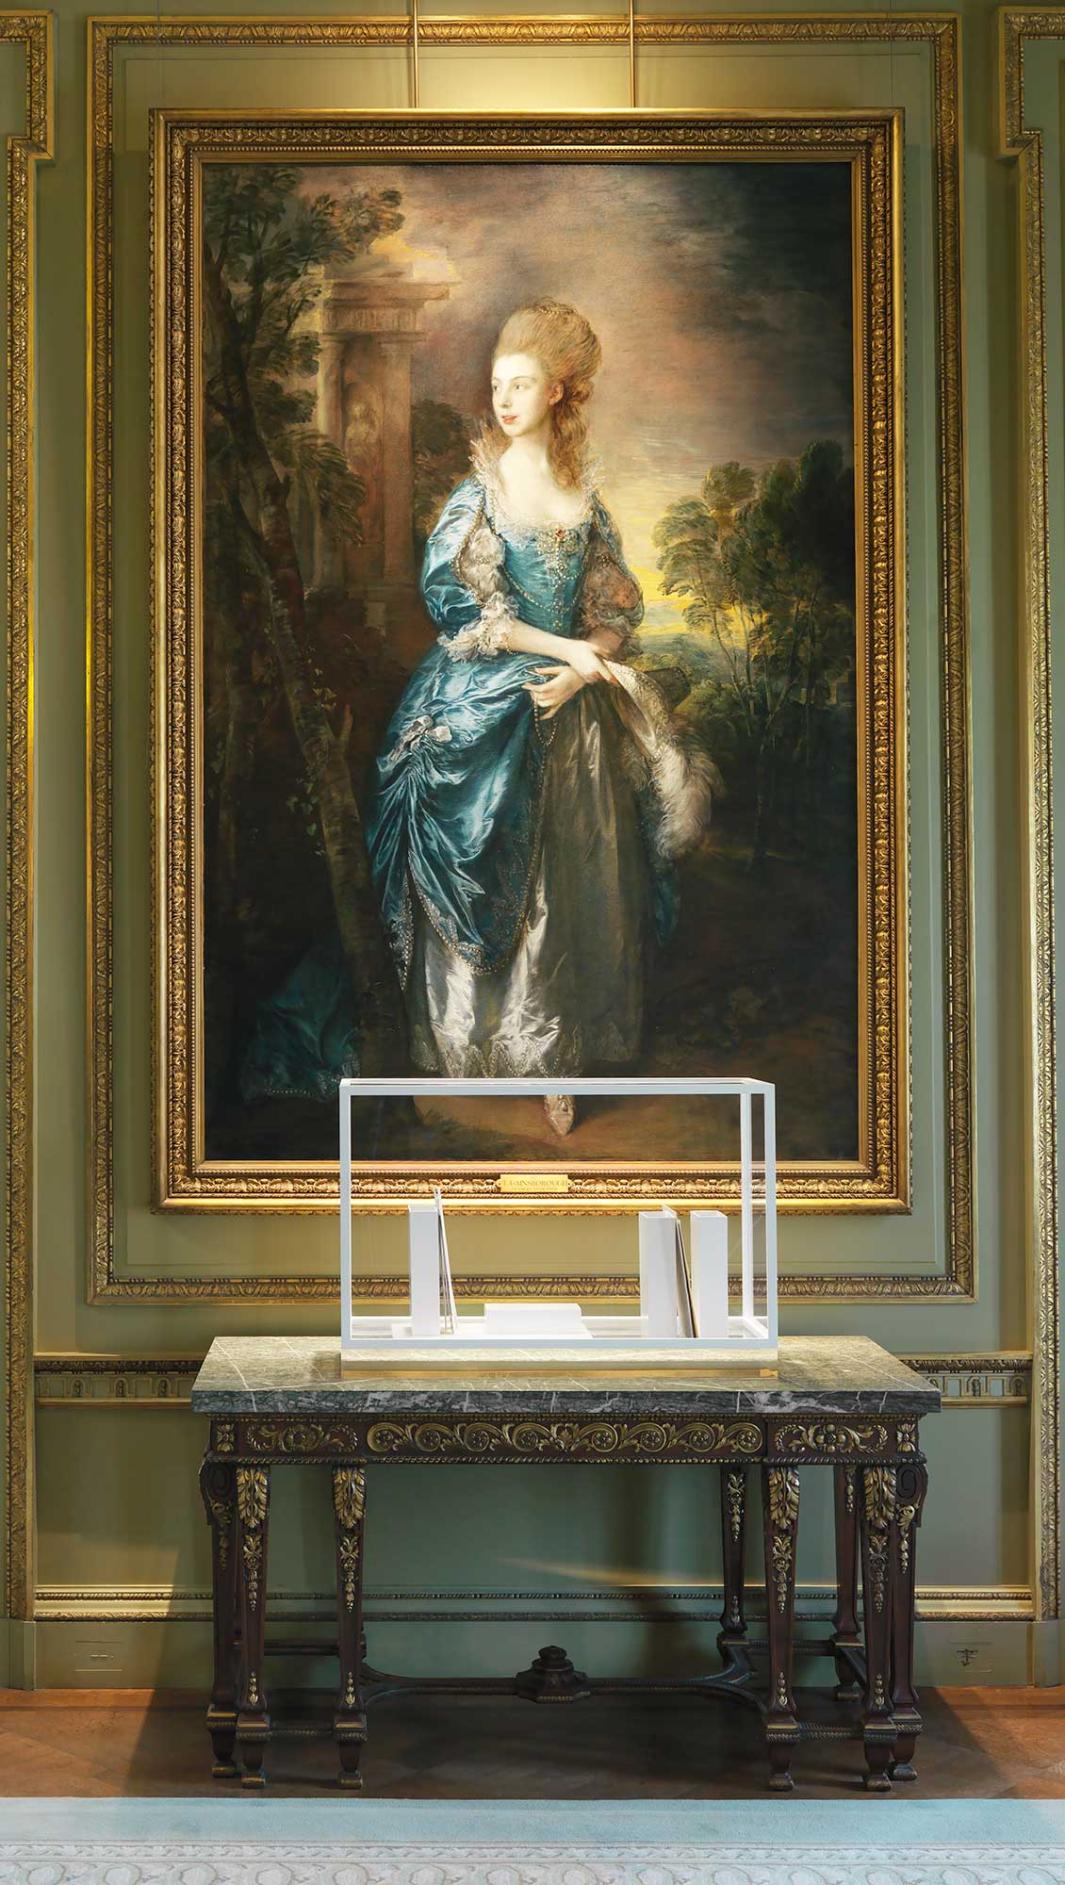 Vitrine containing white porcelain vessels, steel and gold against a full length portrait of a lady in the background